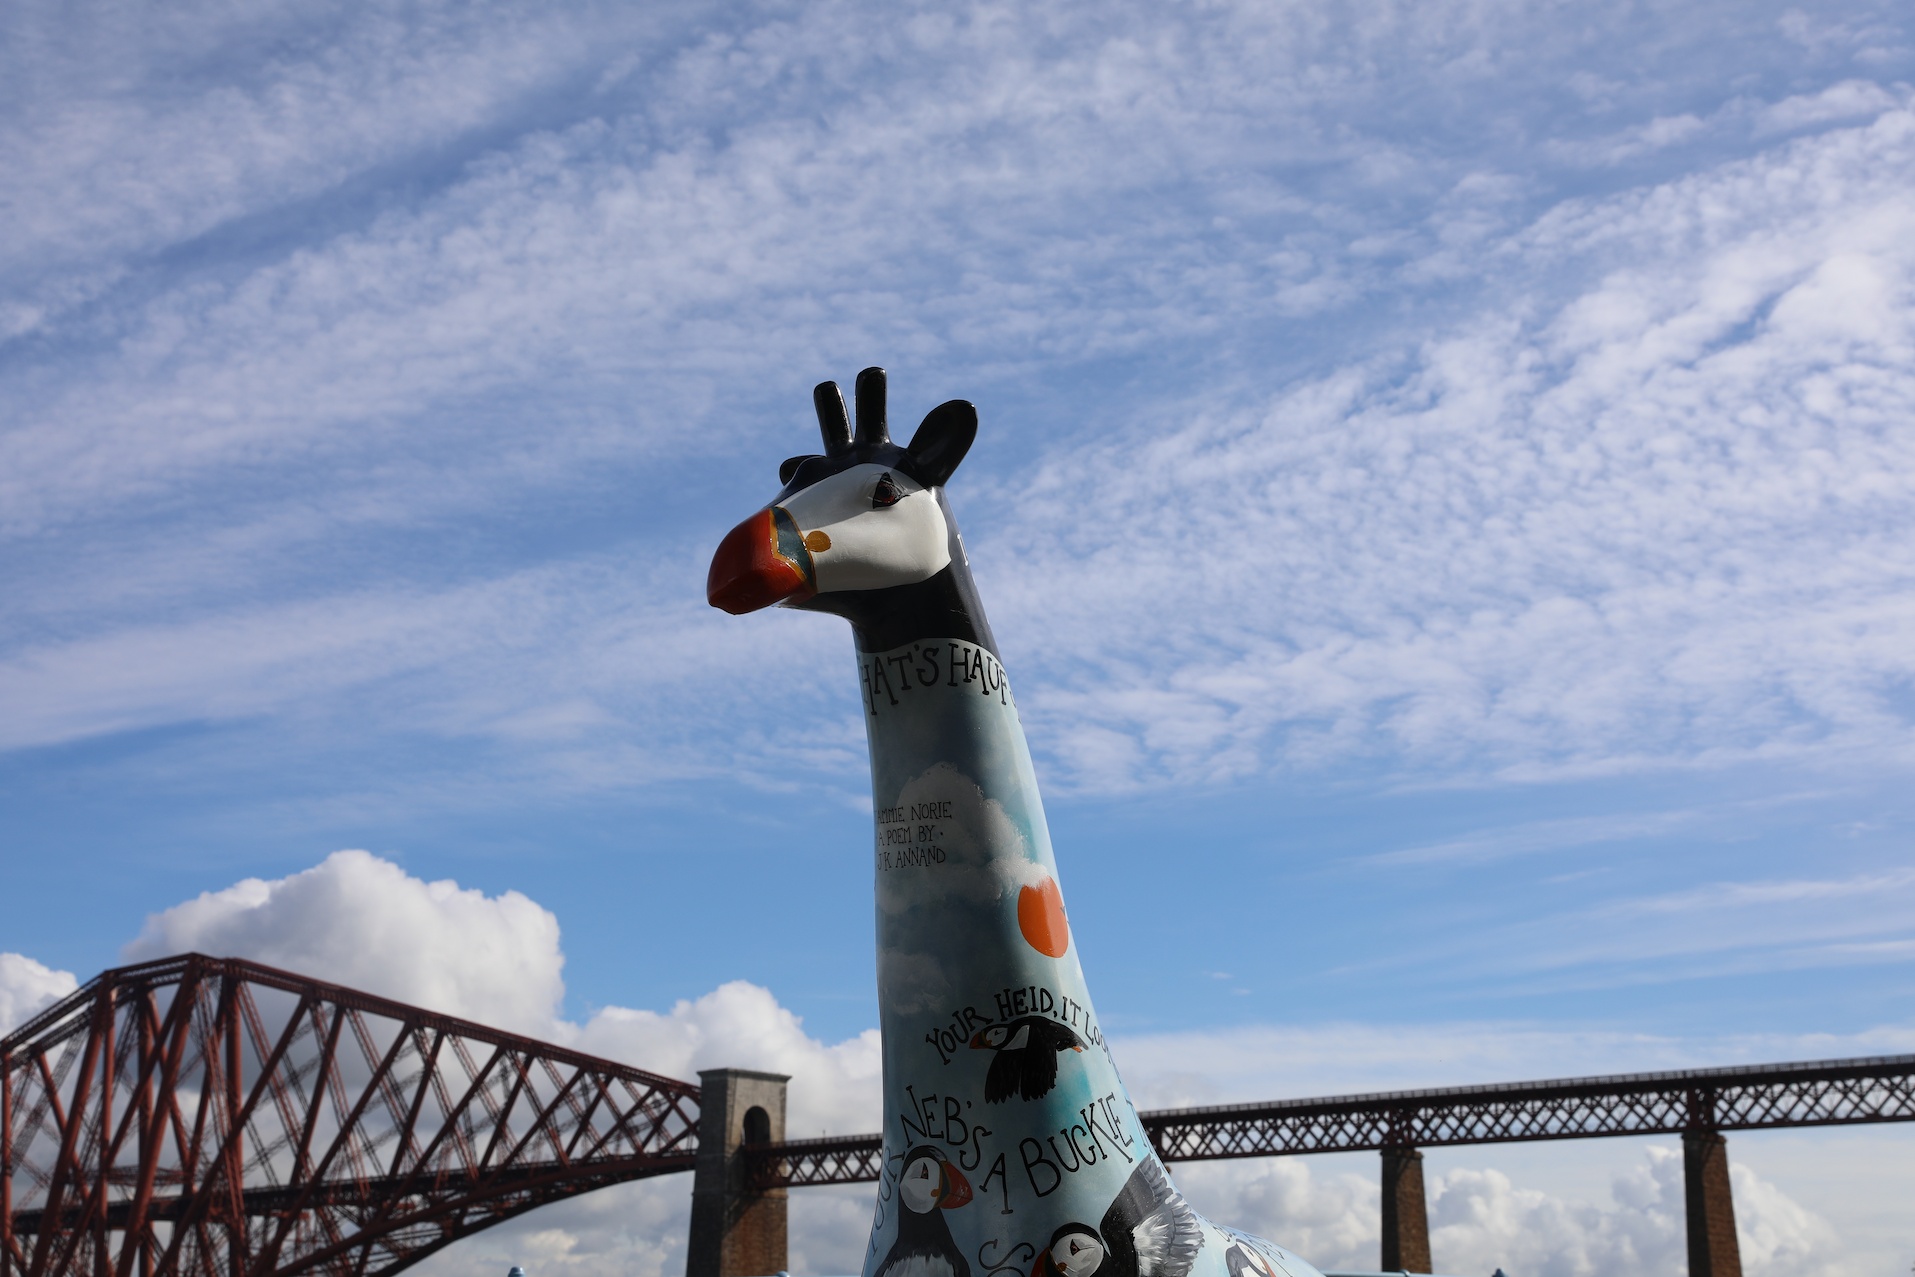 GAT Giraffe statue little parlour Tammie Norrie South Queensferry

Image: AMY MIDDLETON 2022